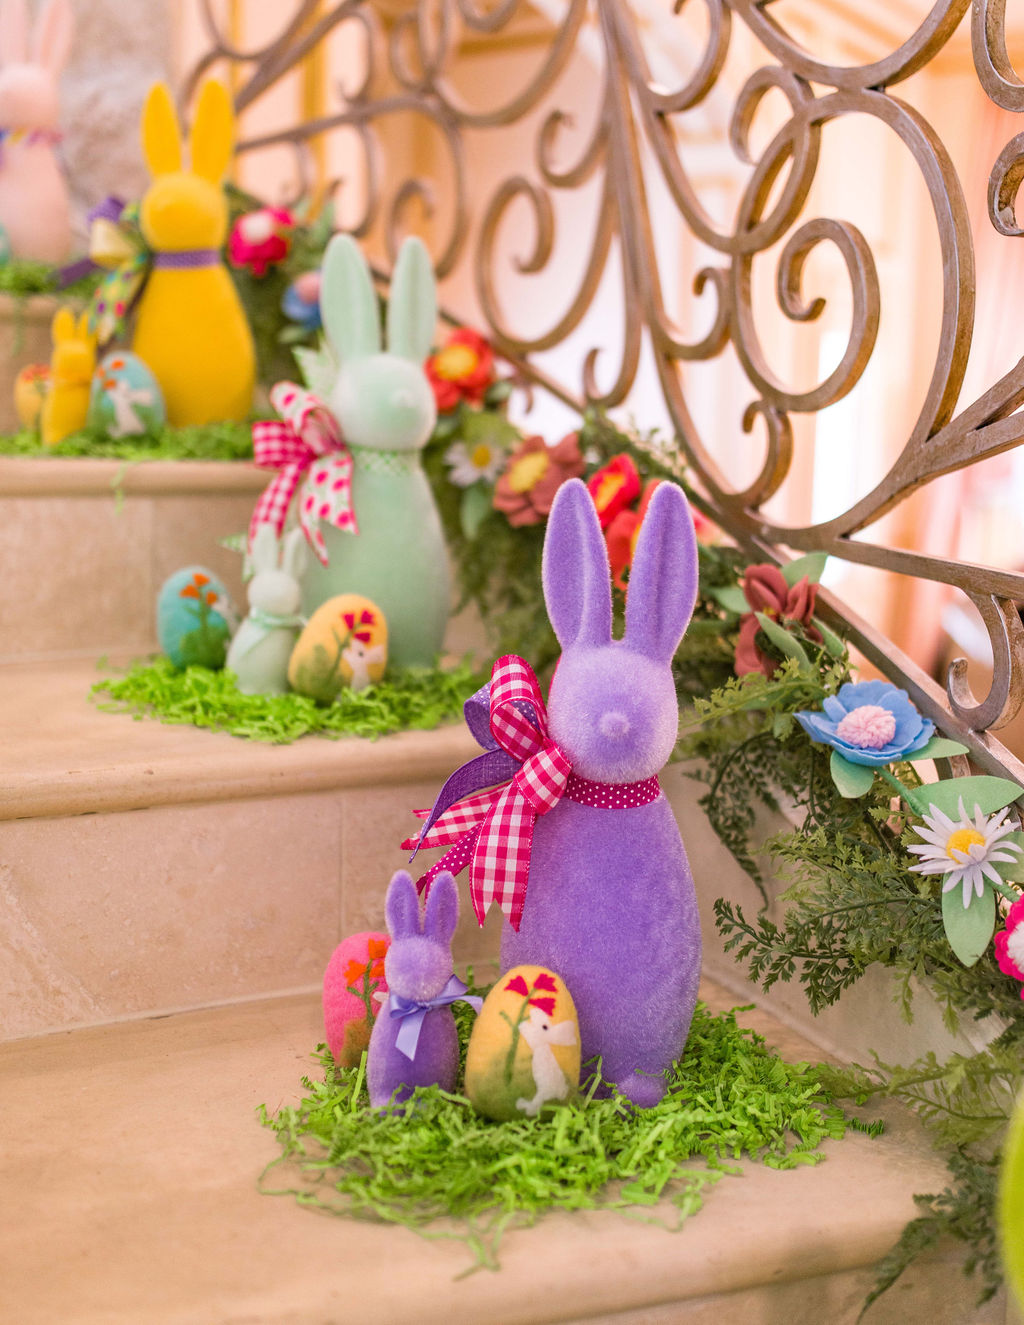 Turtle creek lane interior decorator shows her Easter entryway decor | Easter bunny decor by Glitterville